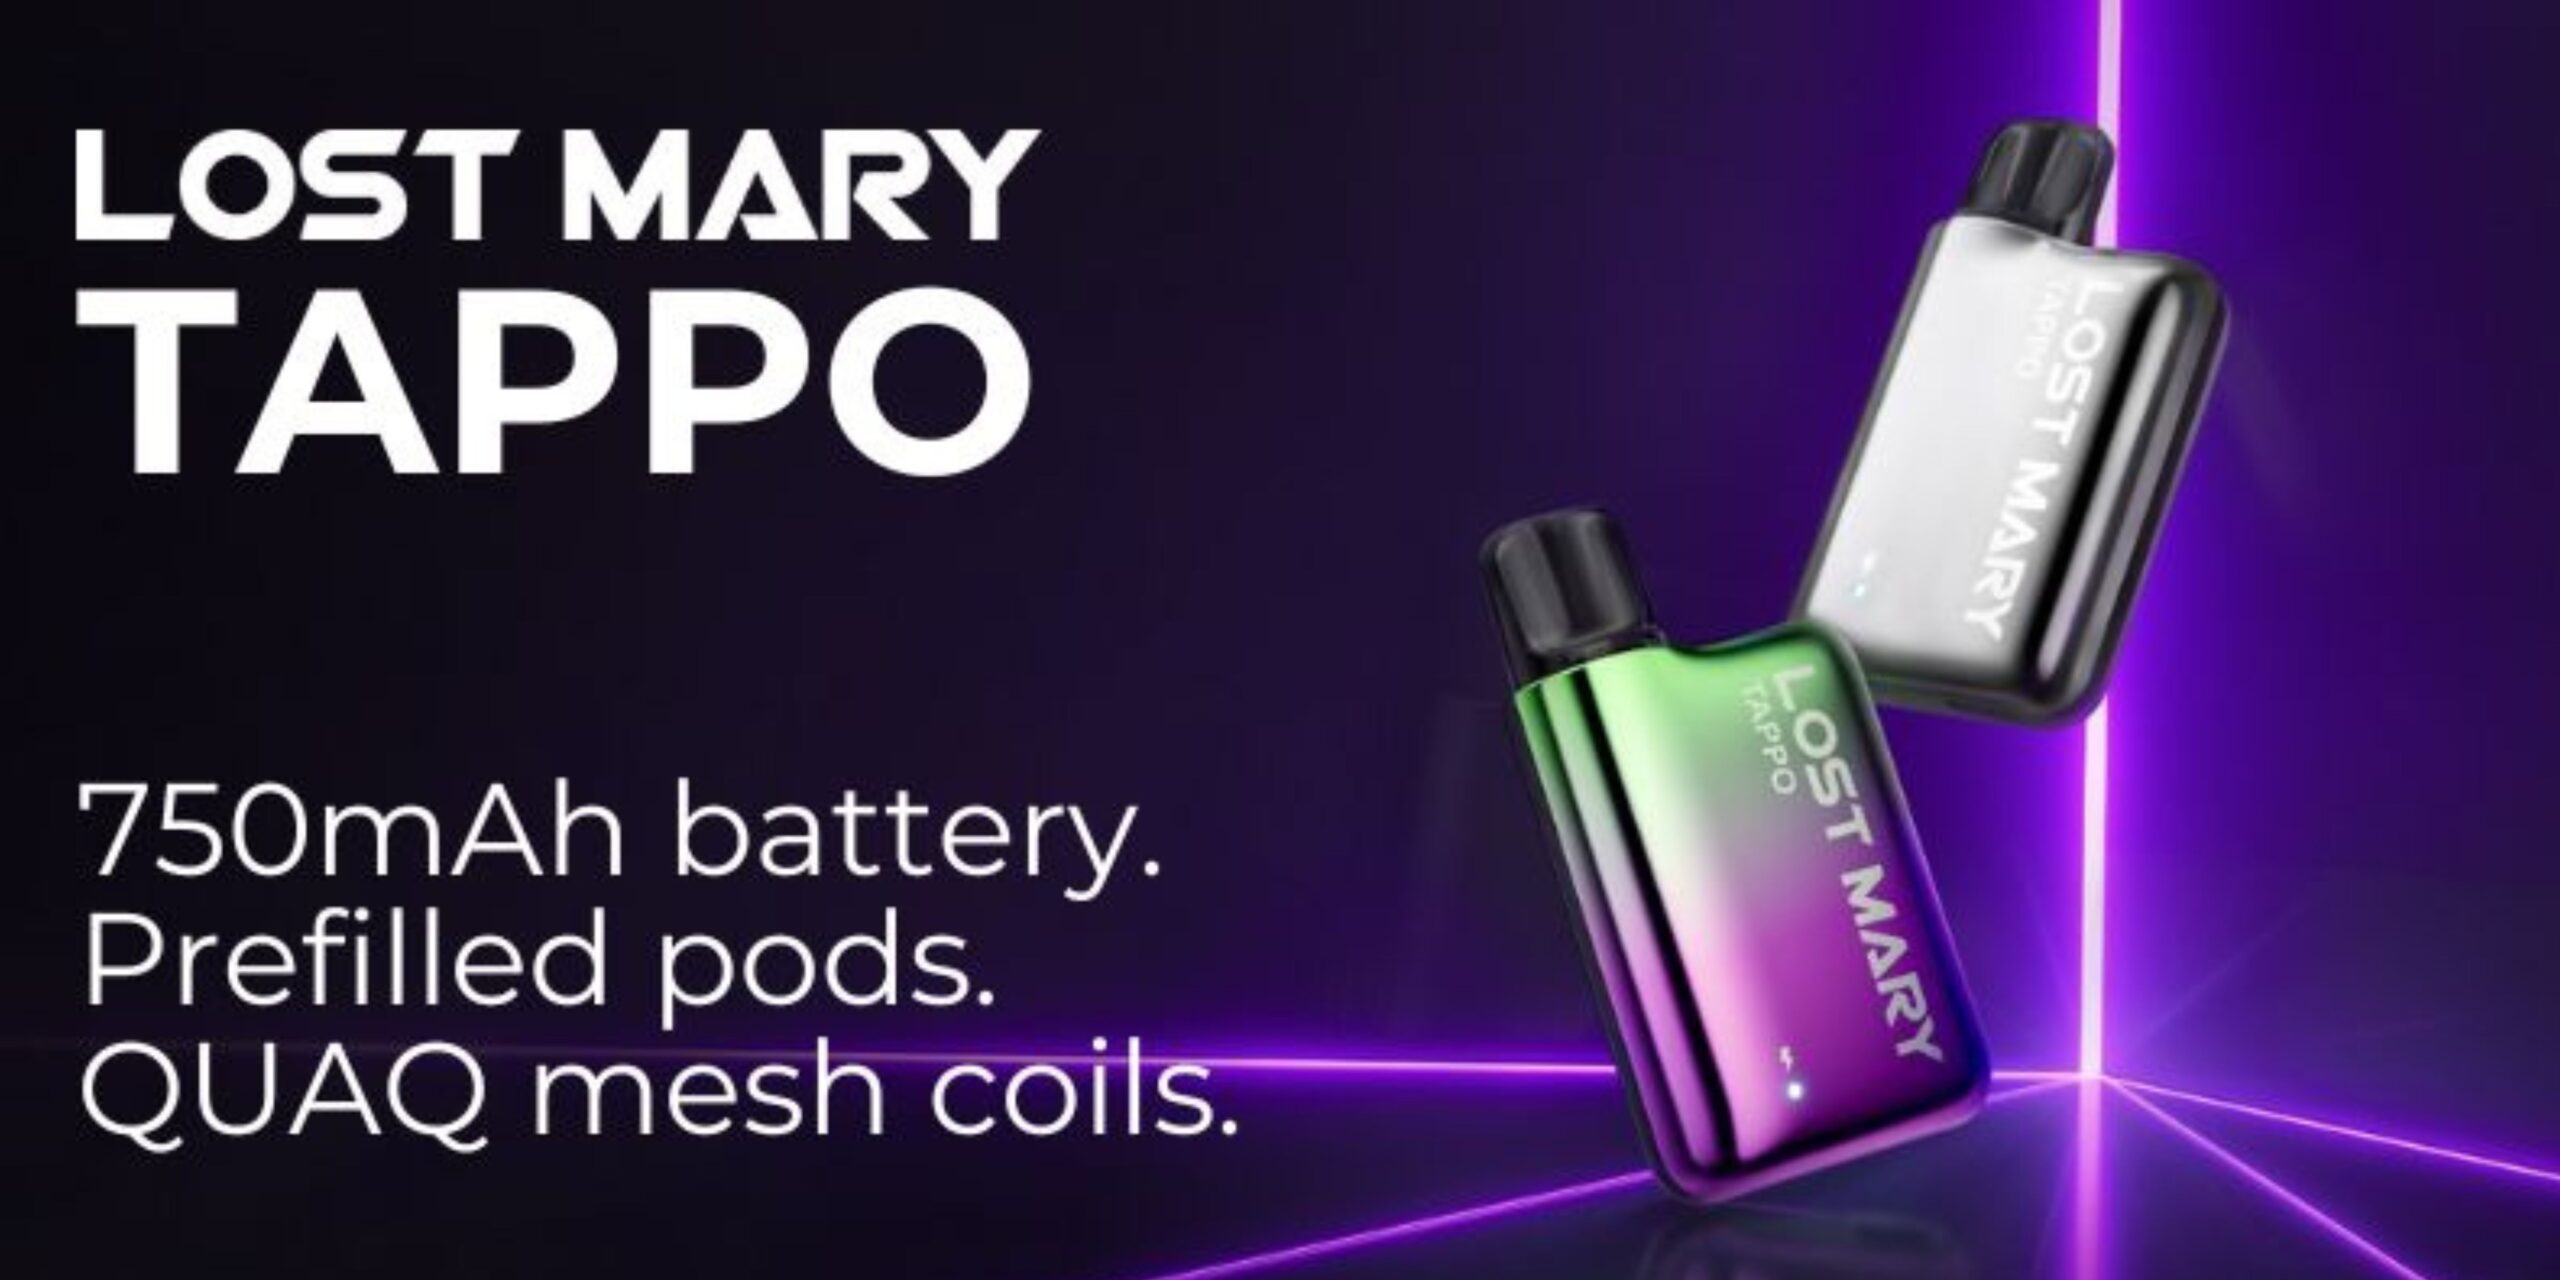 LOST MARY TAPPO – Peach Ice (Replacement Prefilled Pods) VAPING - XMANIA Ireland 14